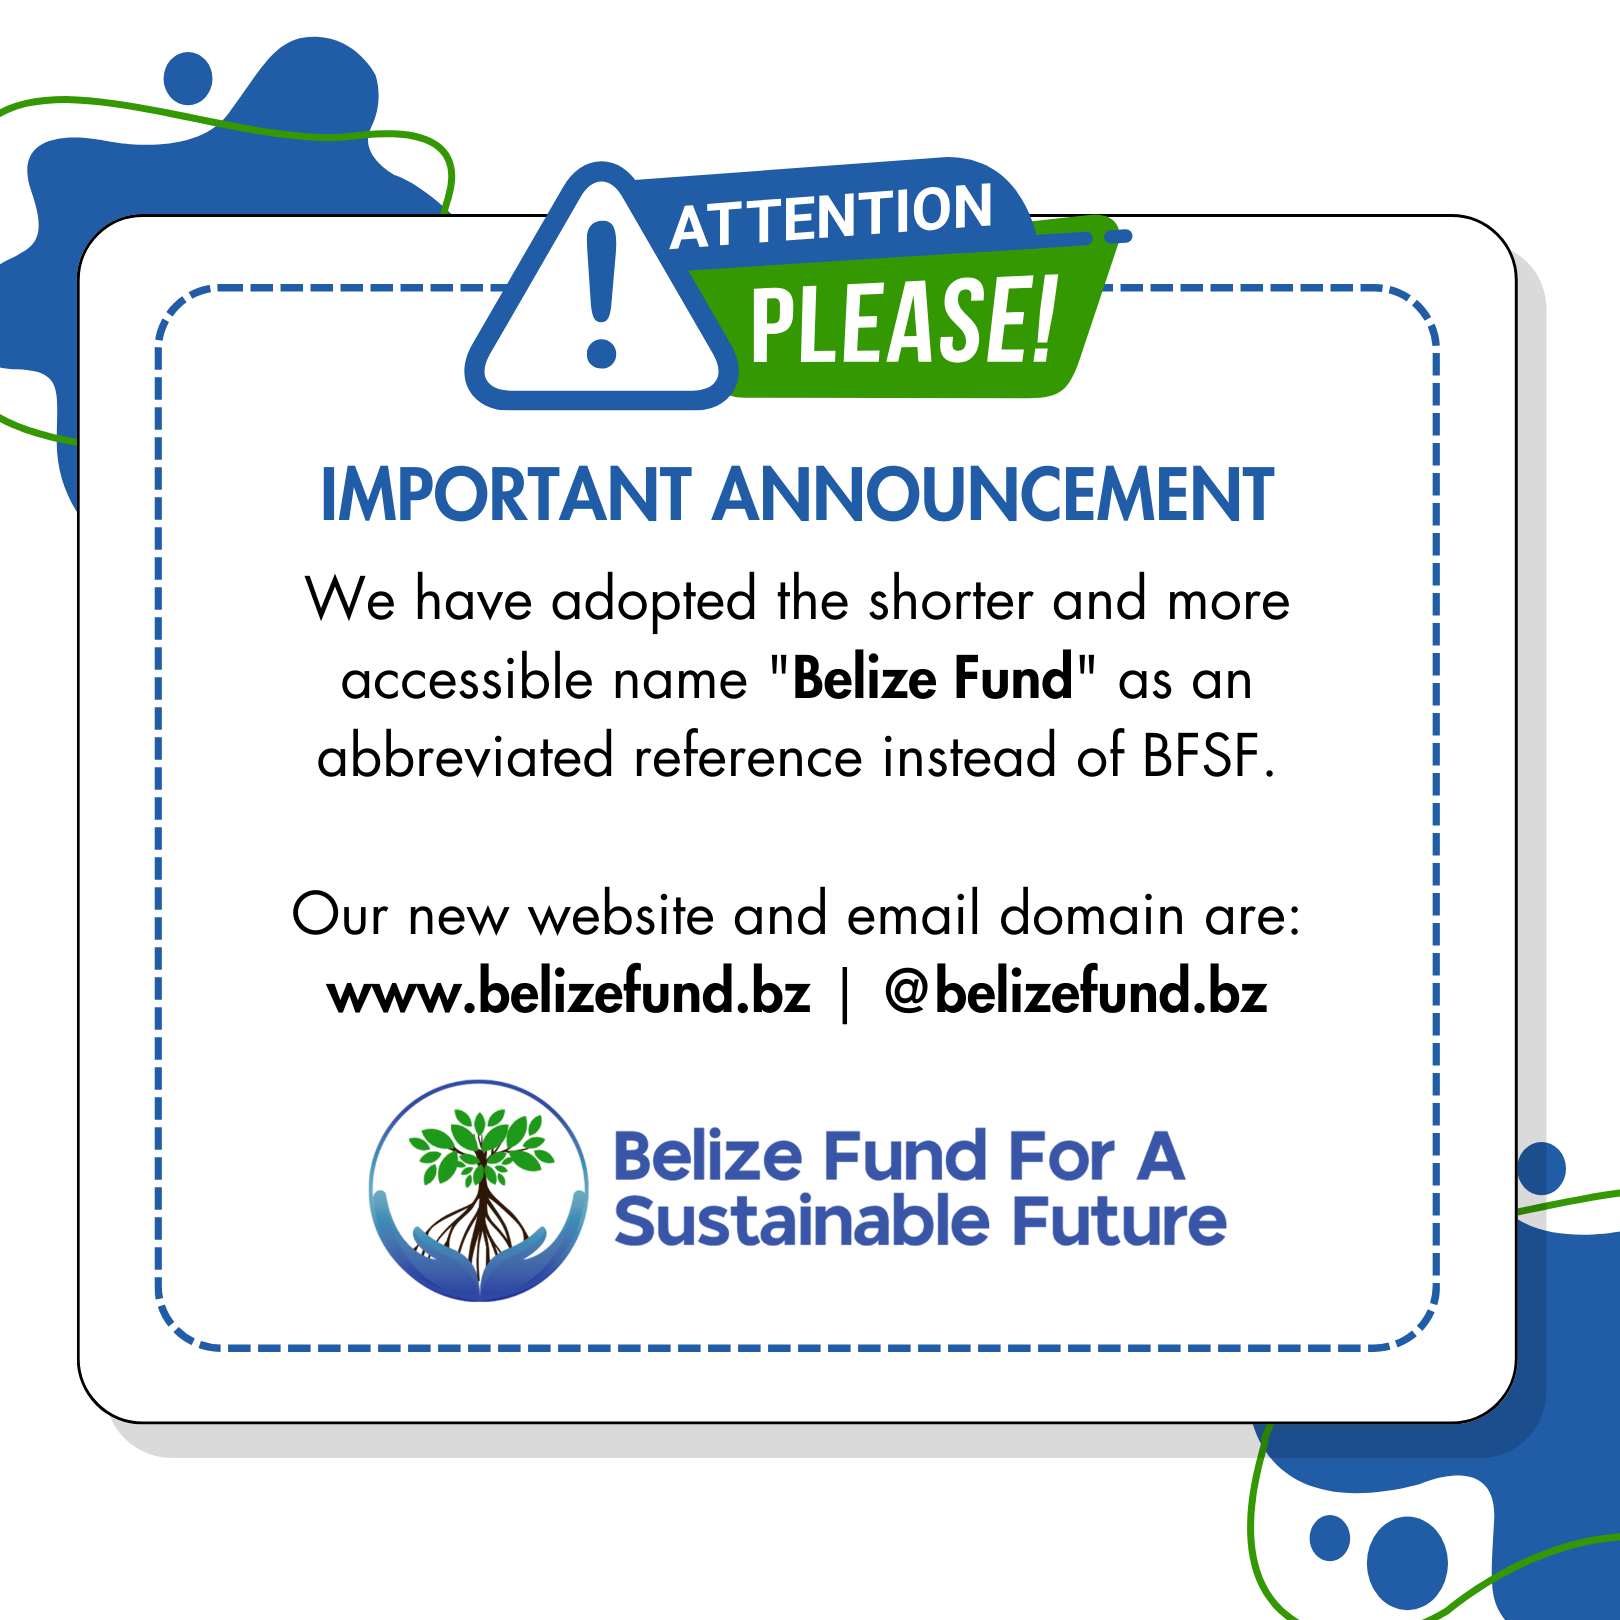 Important Announcement – Adoption of the shorter and more accessible name “Belize Fund”